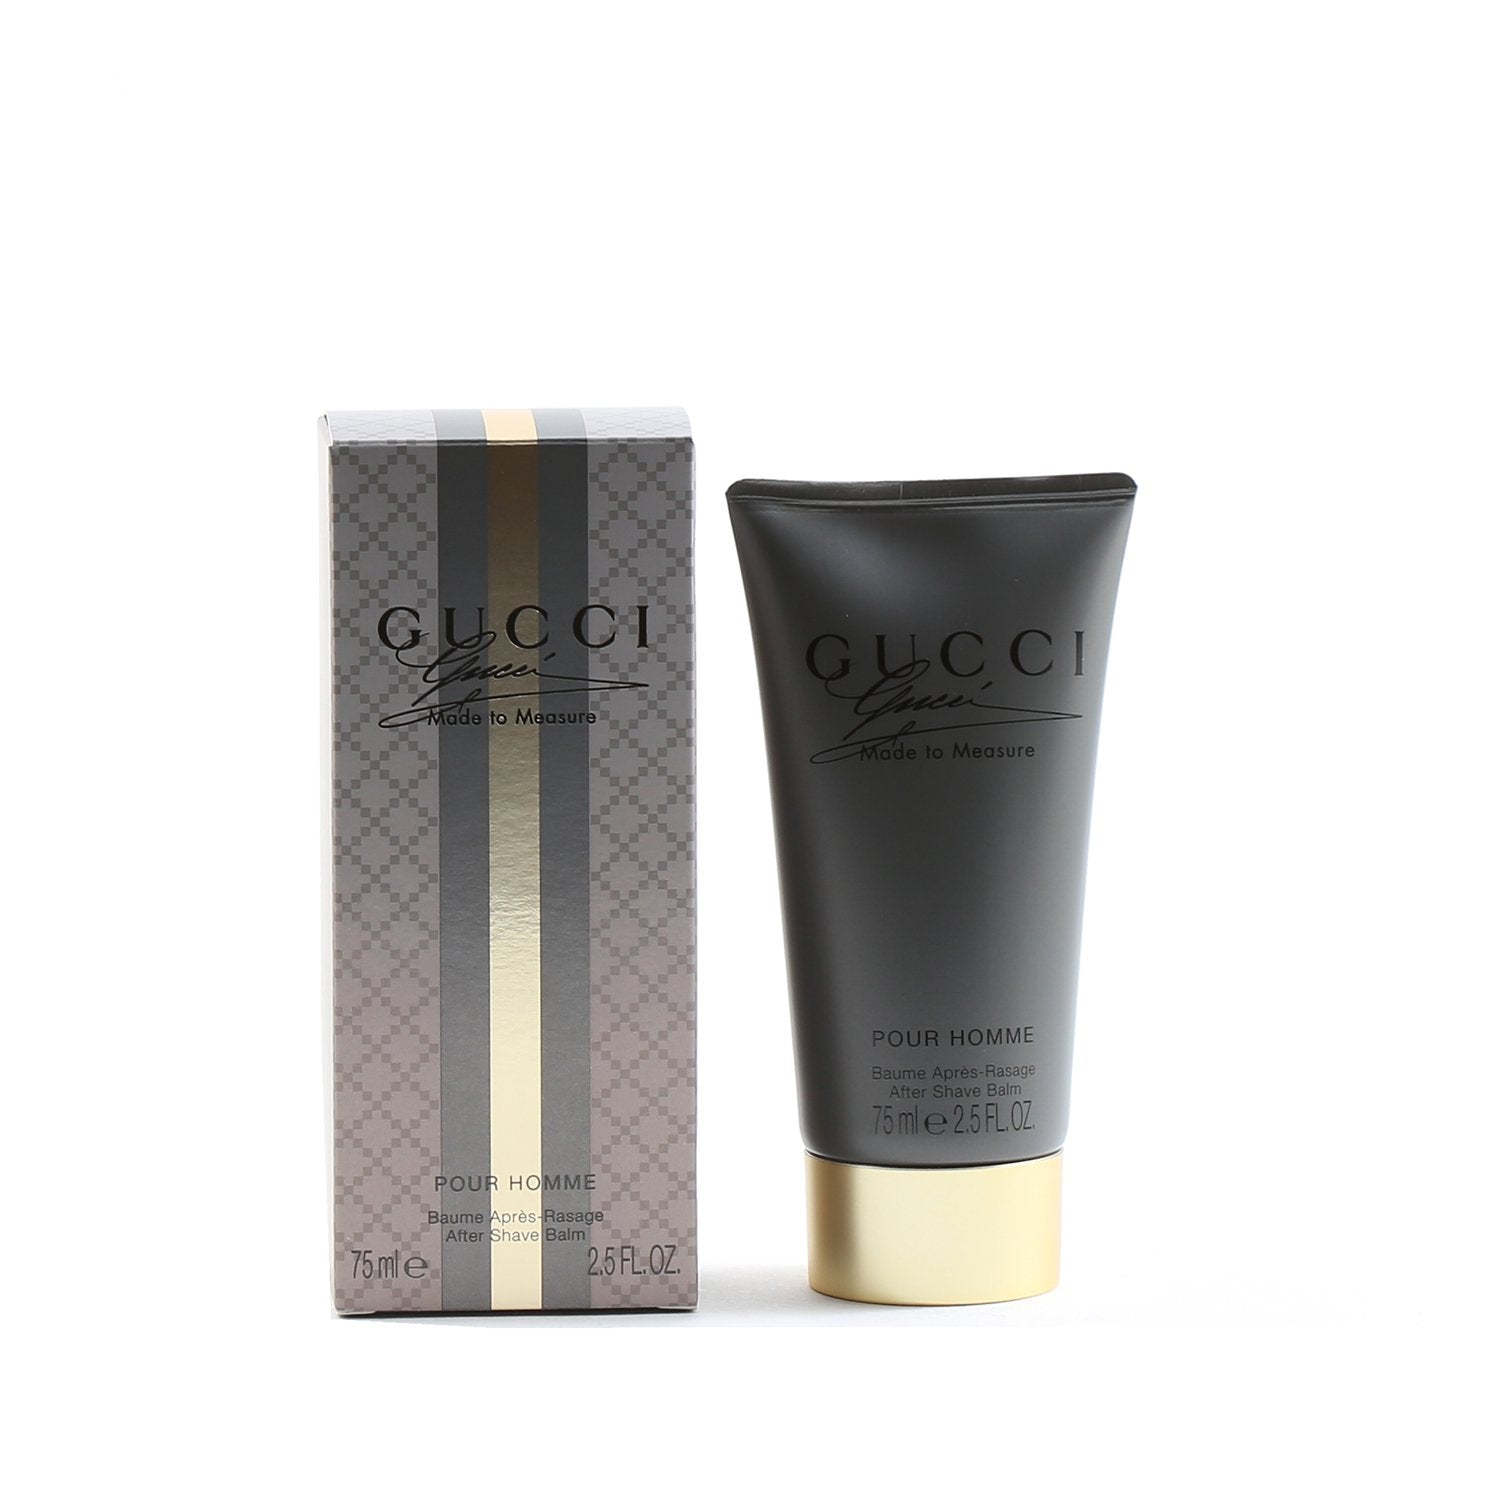 Cologne - GUCCI MADE TO MEASURE POUR HOMME - AFTER SHAVE BALM, 2.5 OZ